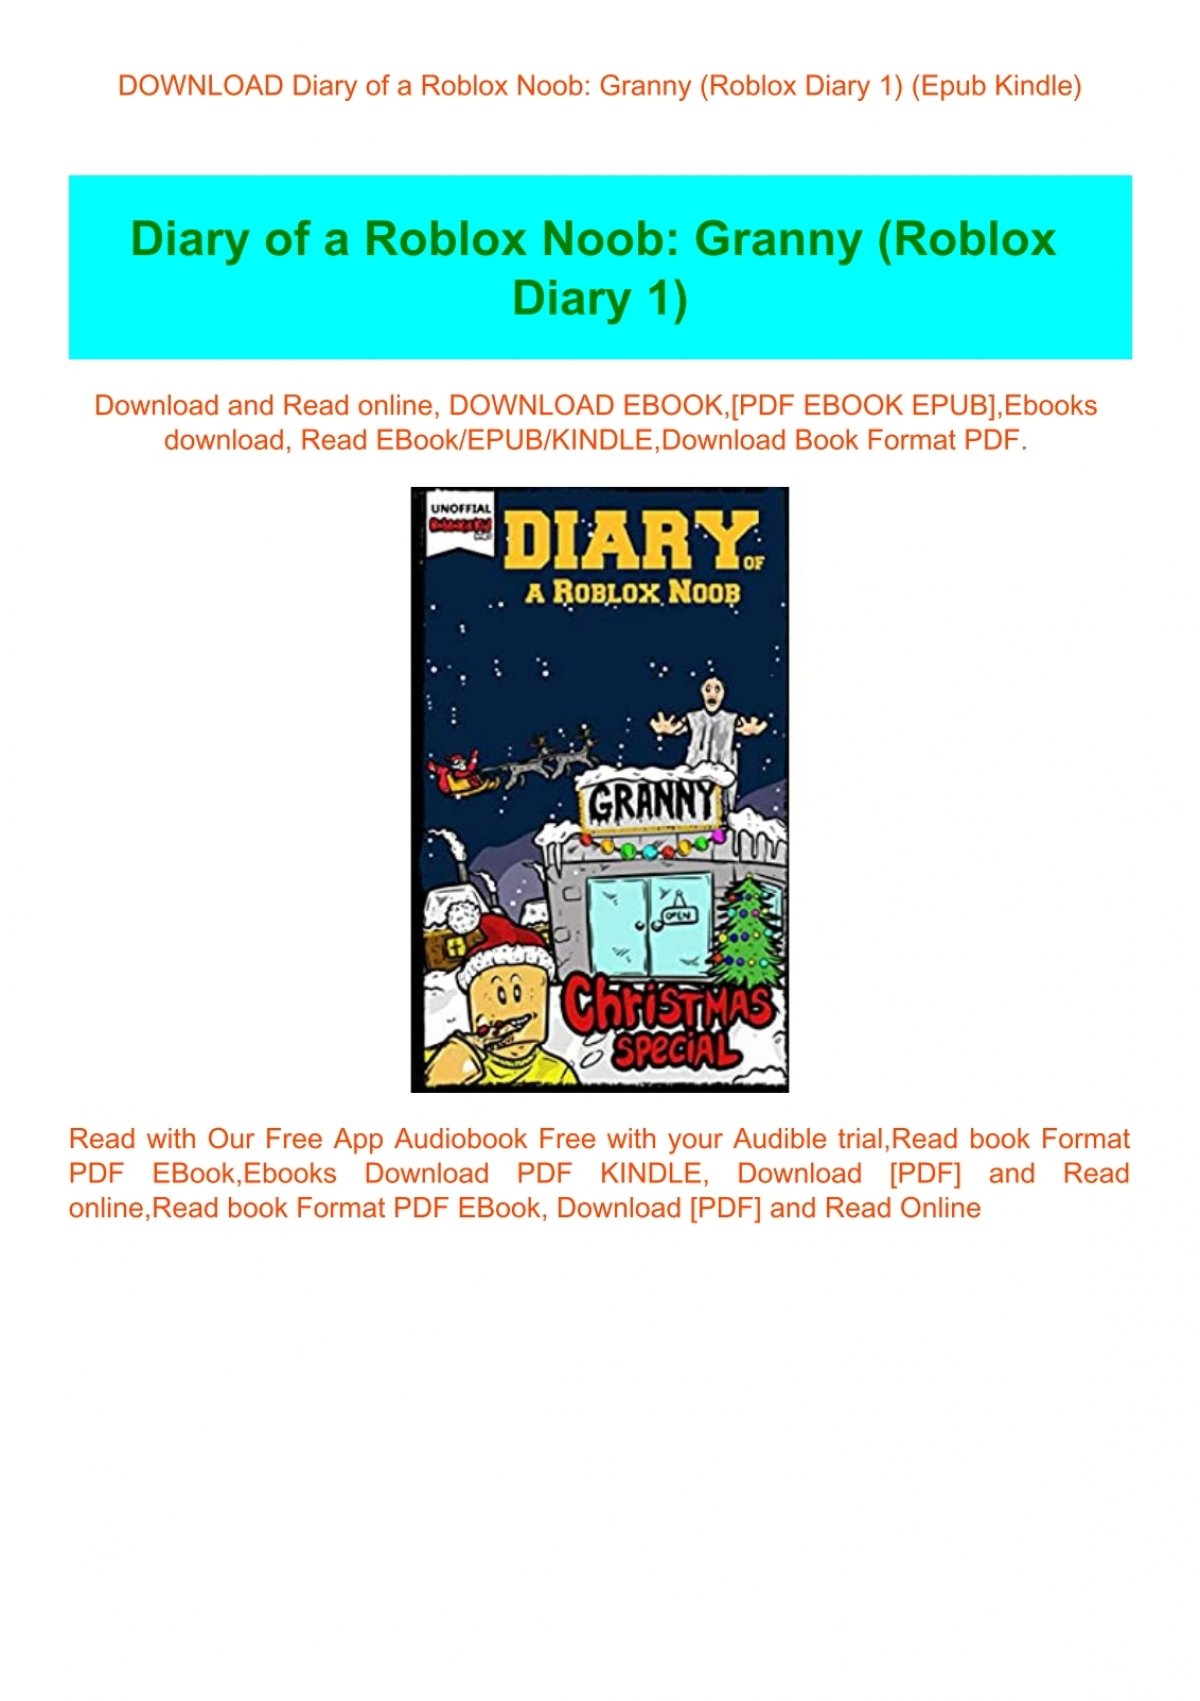 Download Diary Of A Roblox Noob Granny Roblox Diary 1 Epub Kindle - roblox sign up on kindle